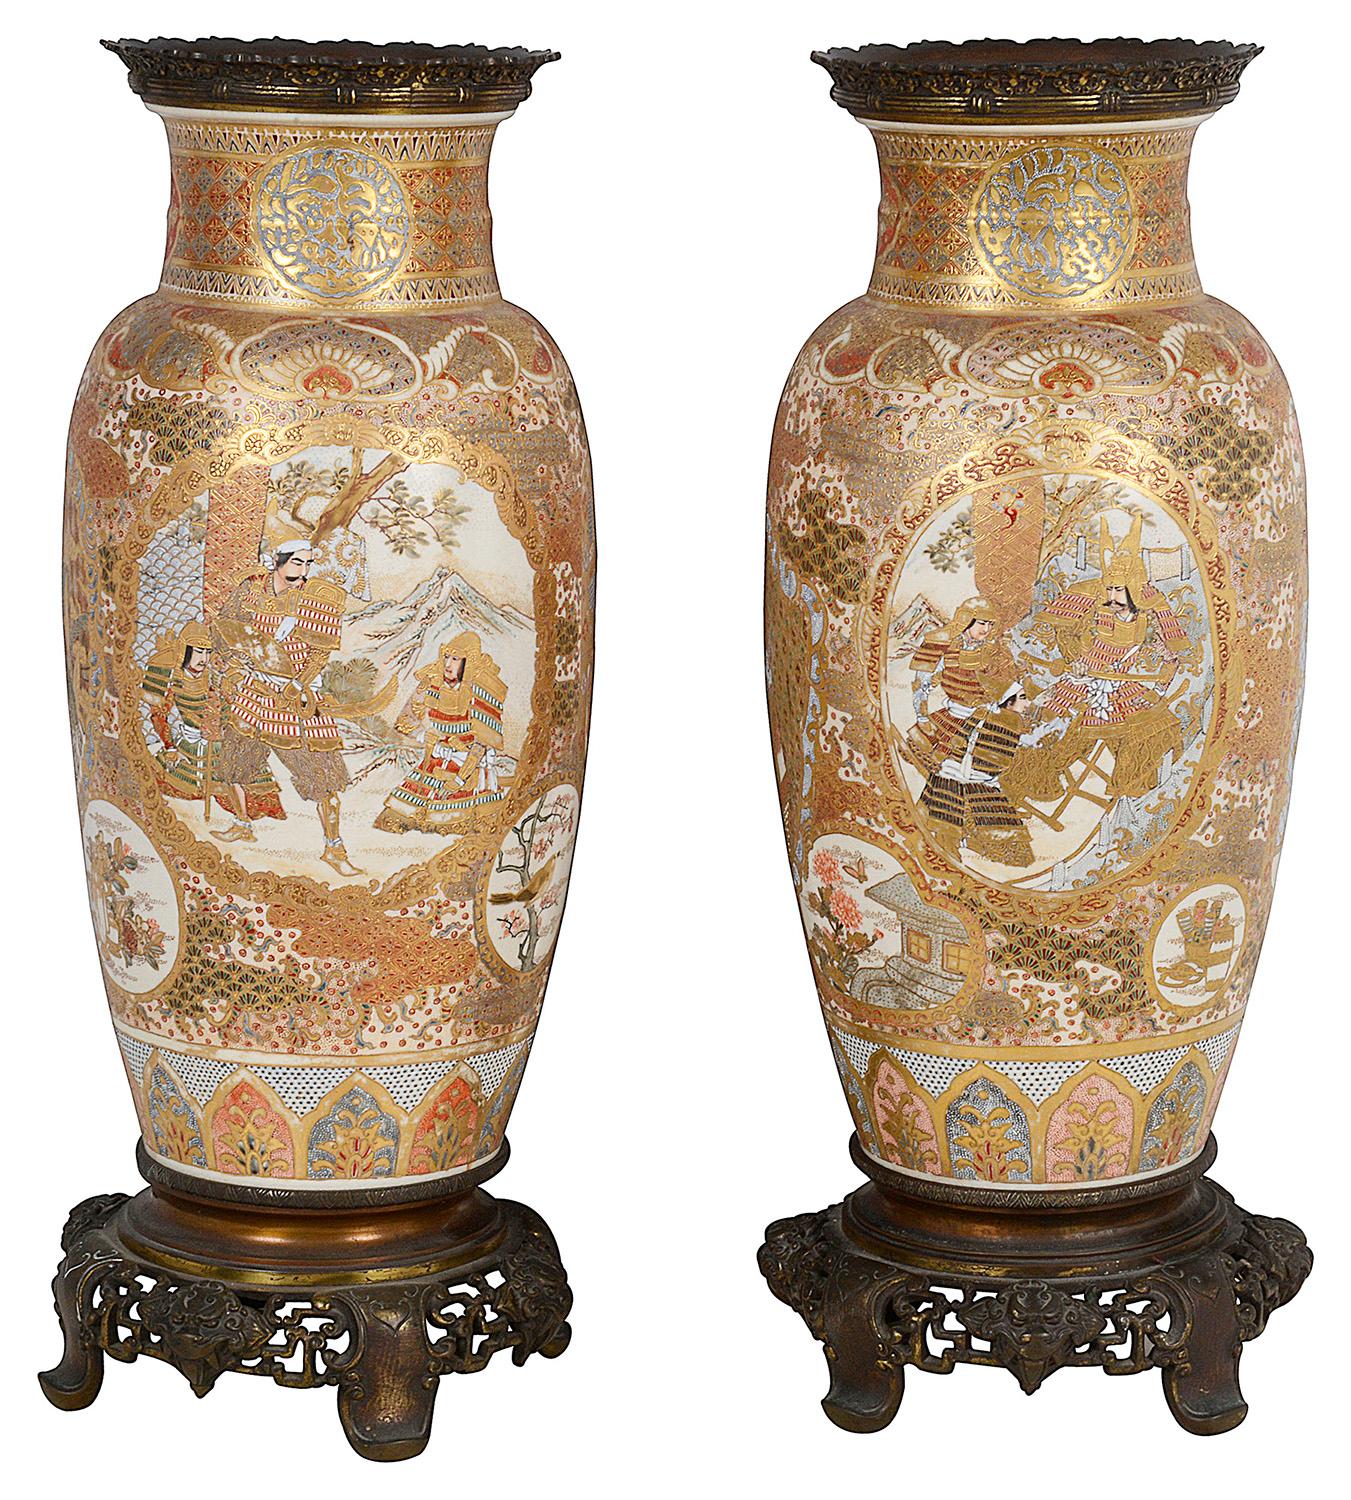 A very good quality pair of Japanese Meiji period (1868-1912) Satsuma porcelain vases / lamps. 
Each with wonderful gilded classical motif decoration, with inset hand painted panels depicting various scenes of courtiers in attendance and Samurai